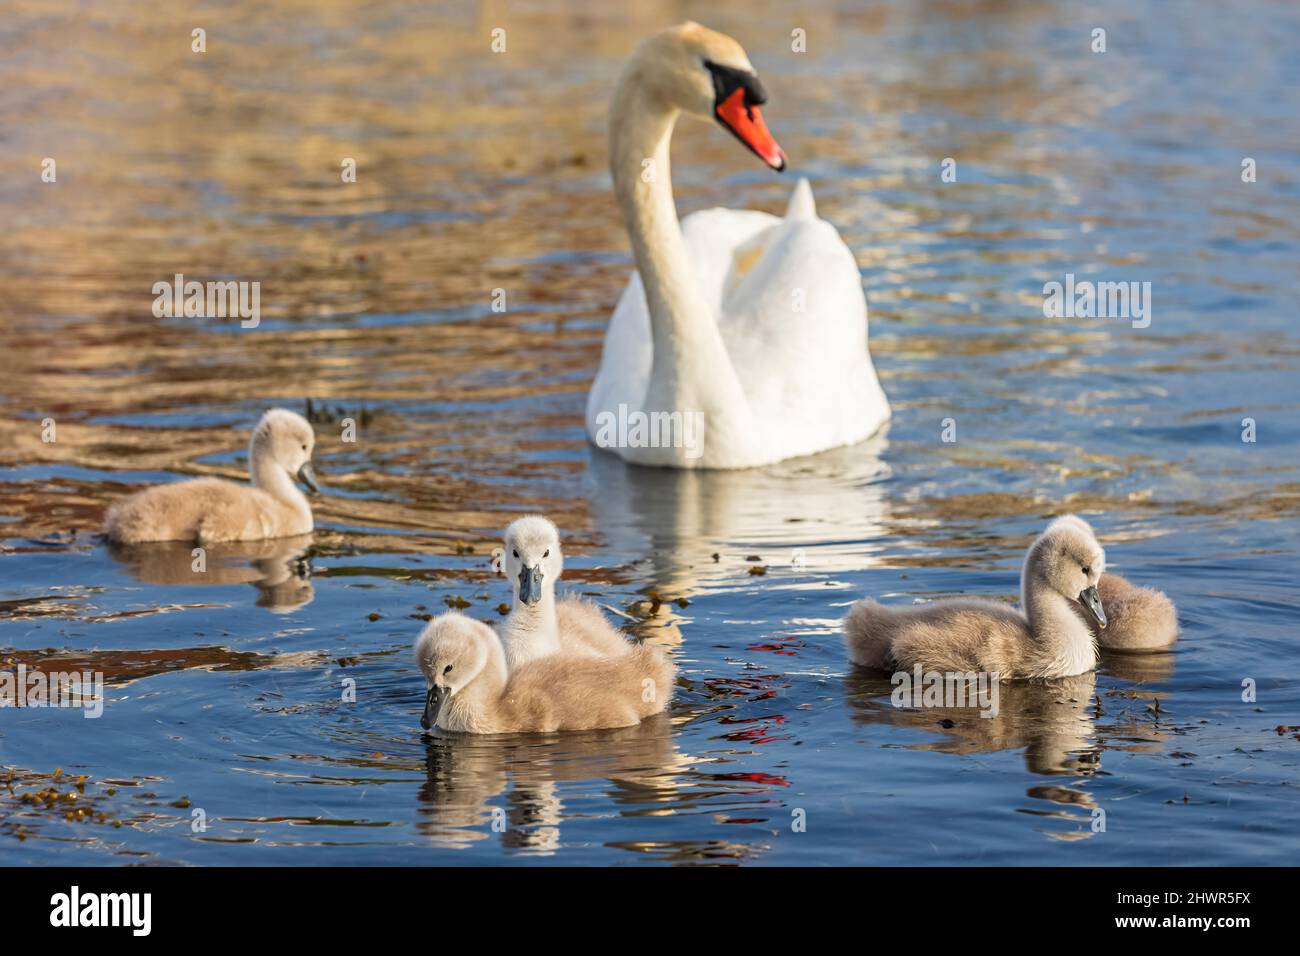 Adult swan swimming with cygnets on water Stock Photo